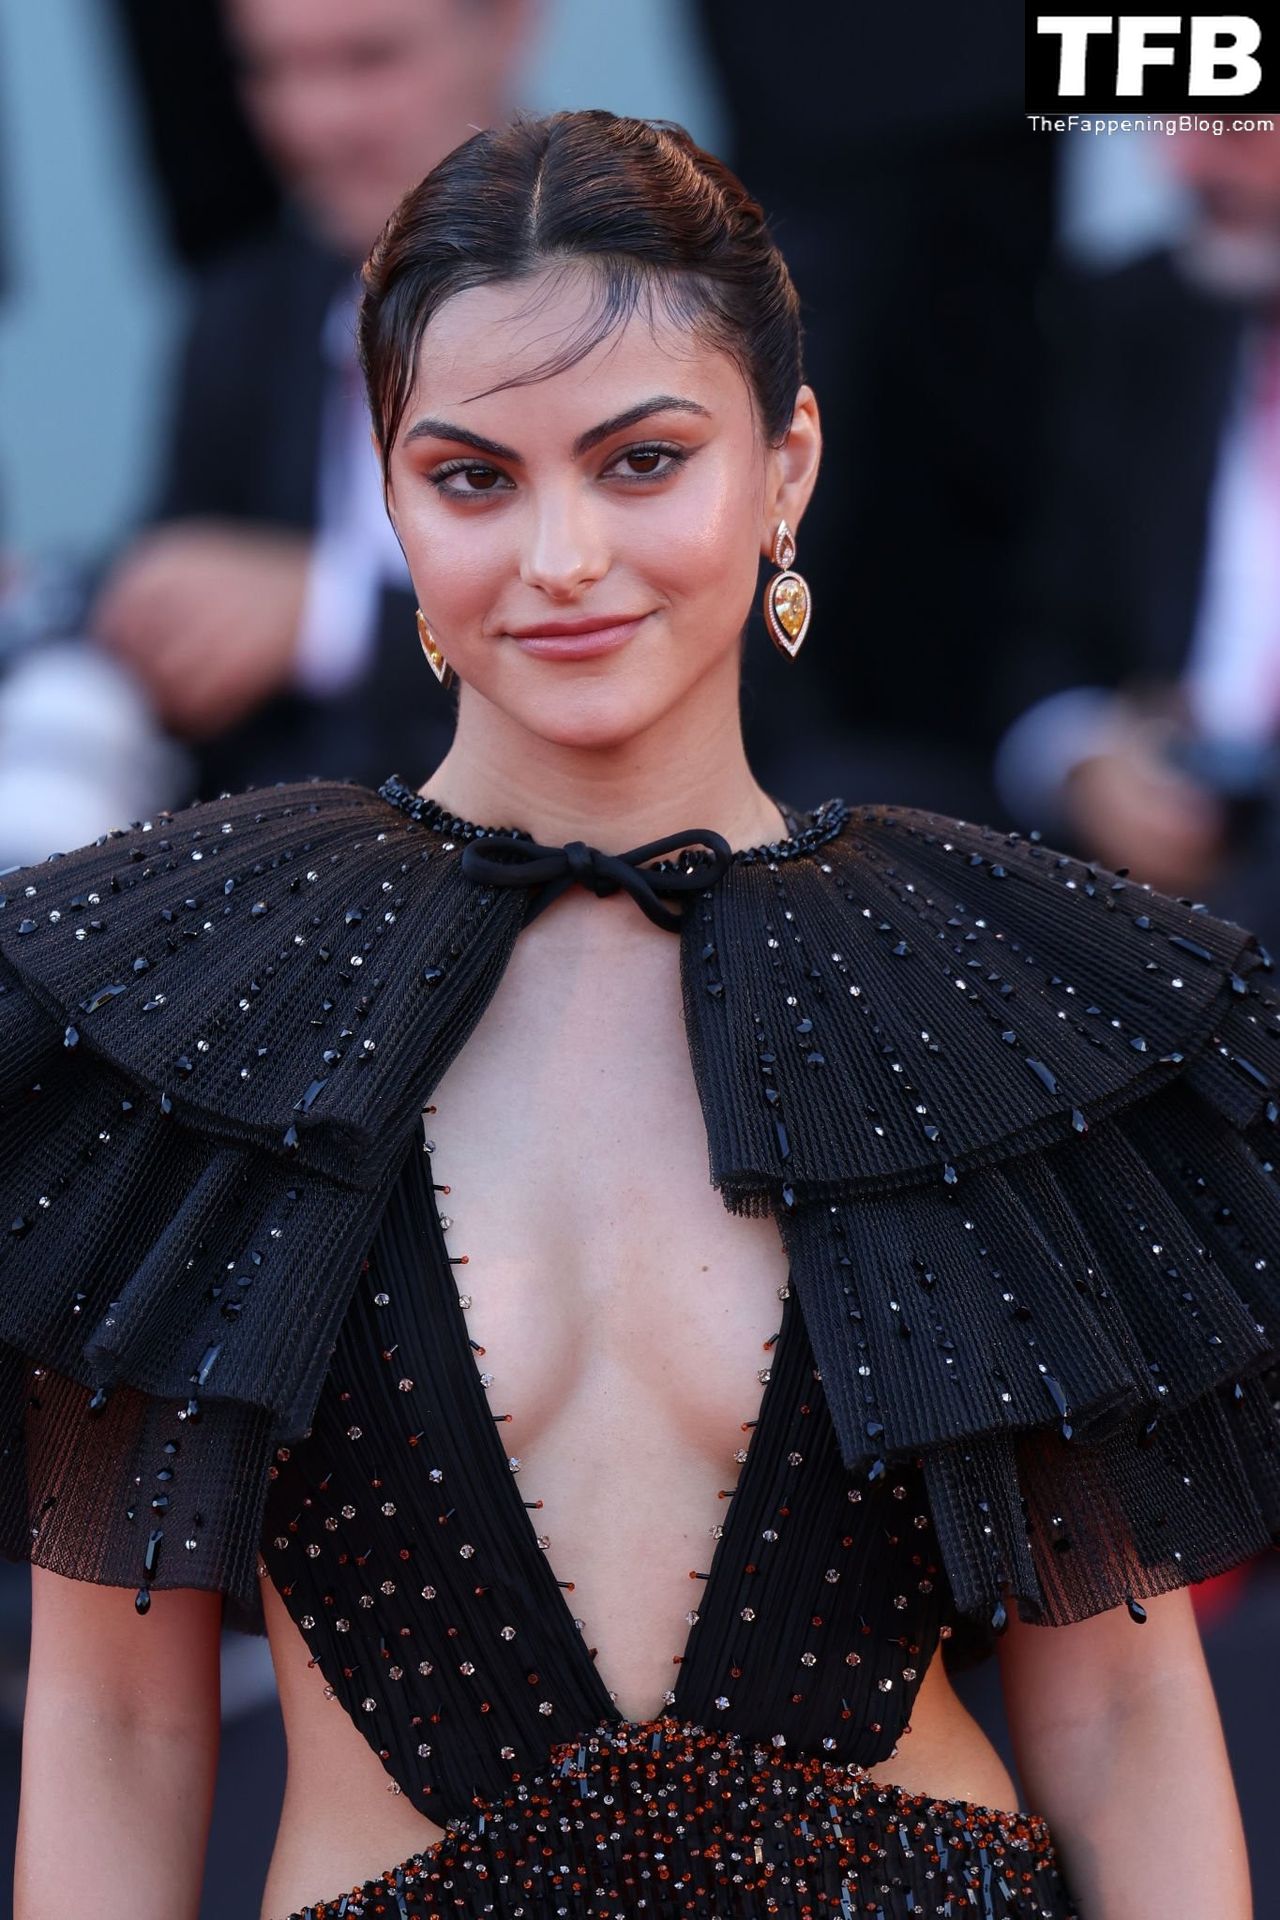 Camila-Mendes-Sexy-The-Fappening-Blog-14.jpg